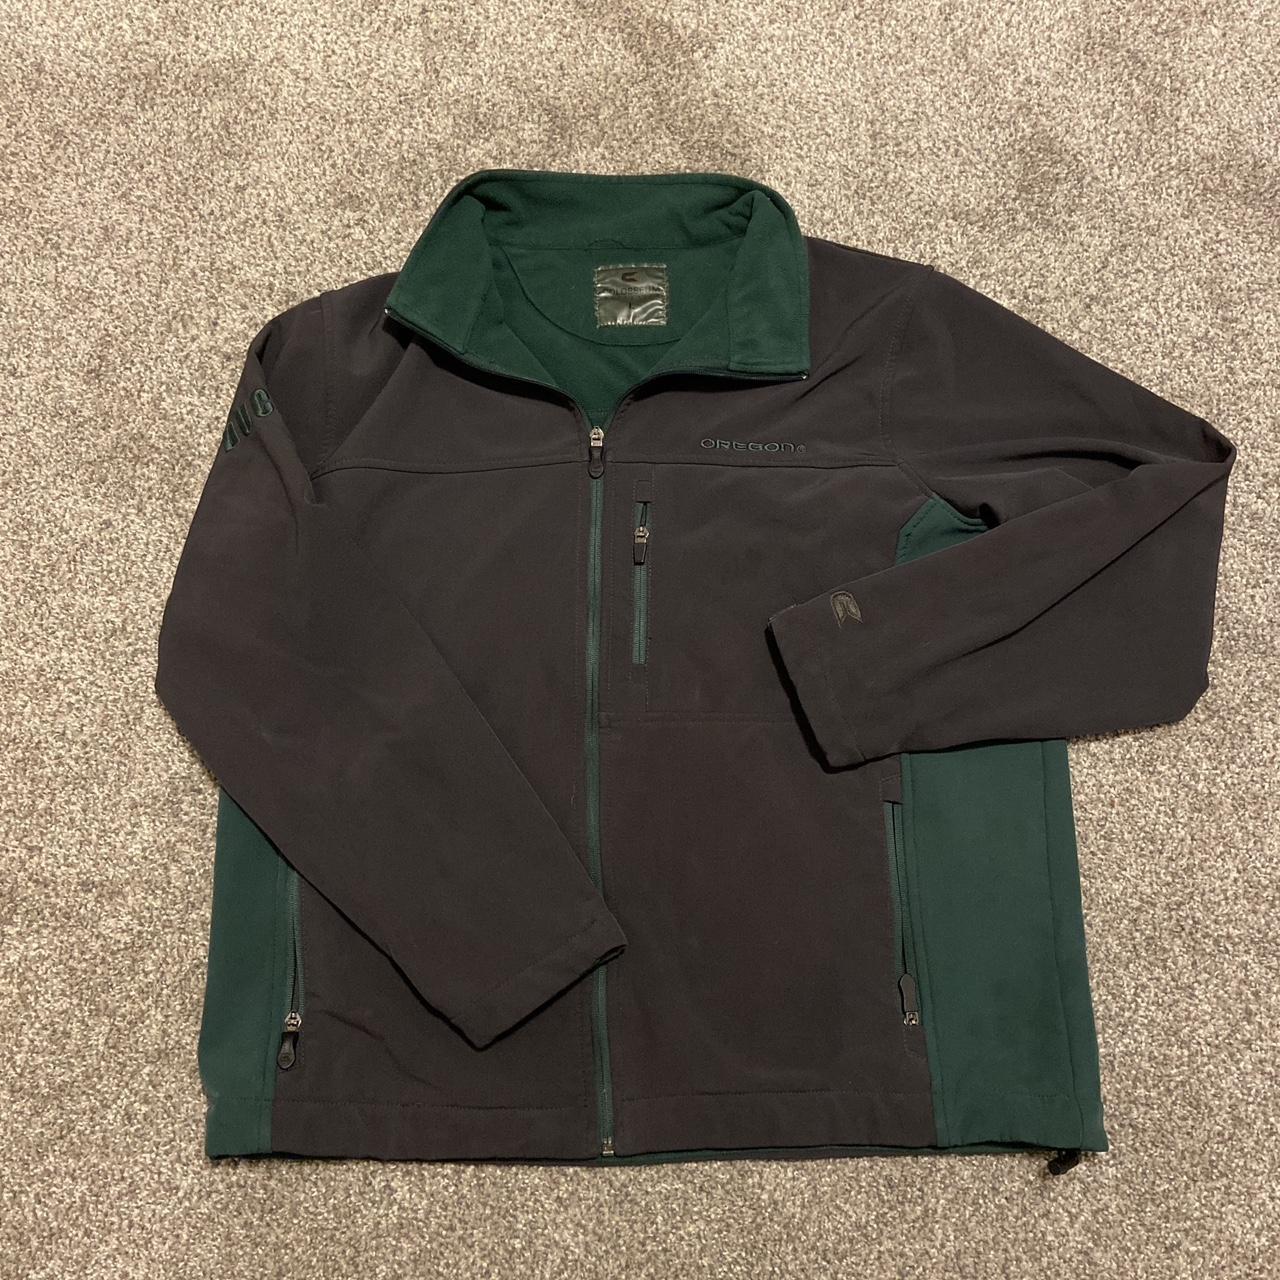 Colosseum Men's Green and Grey Jacket